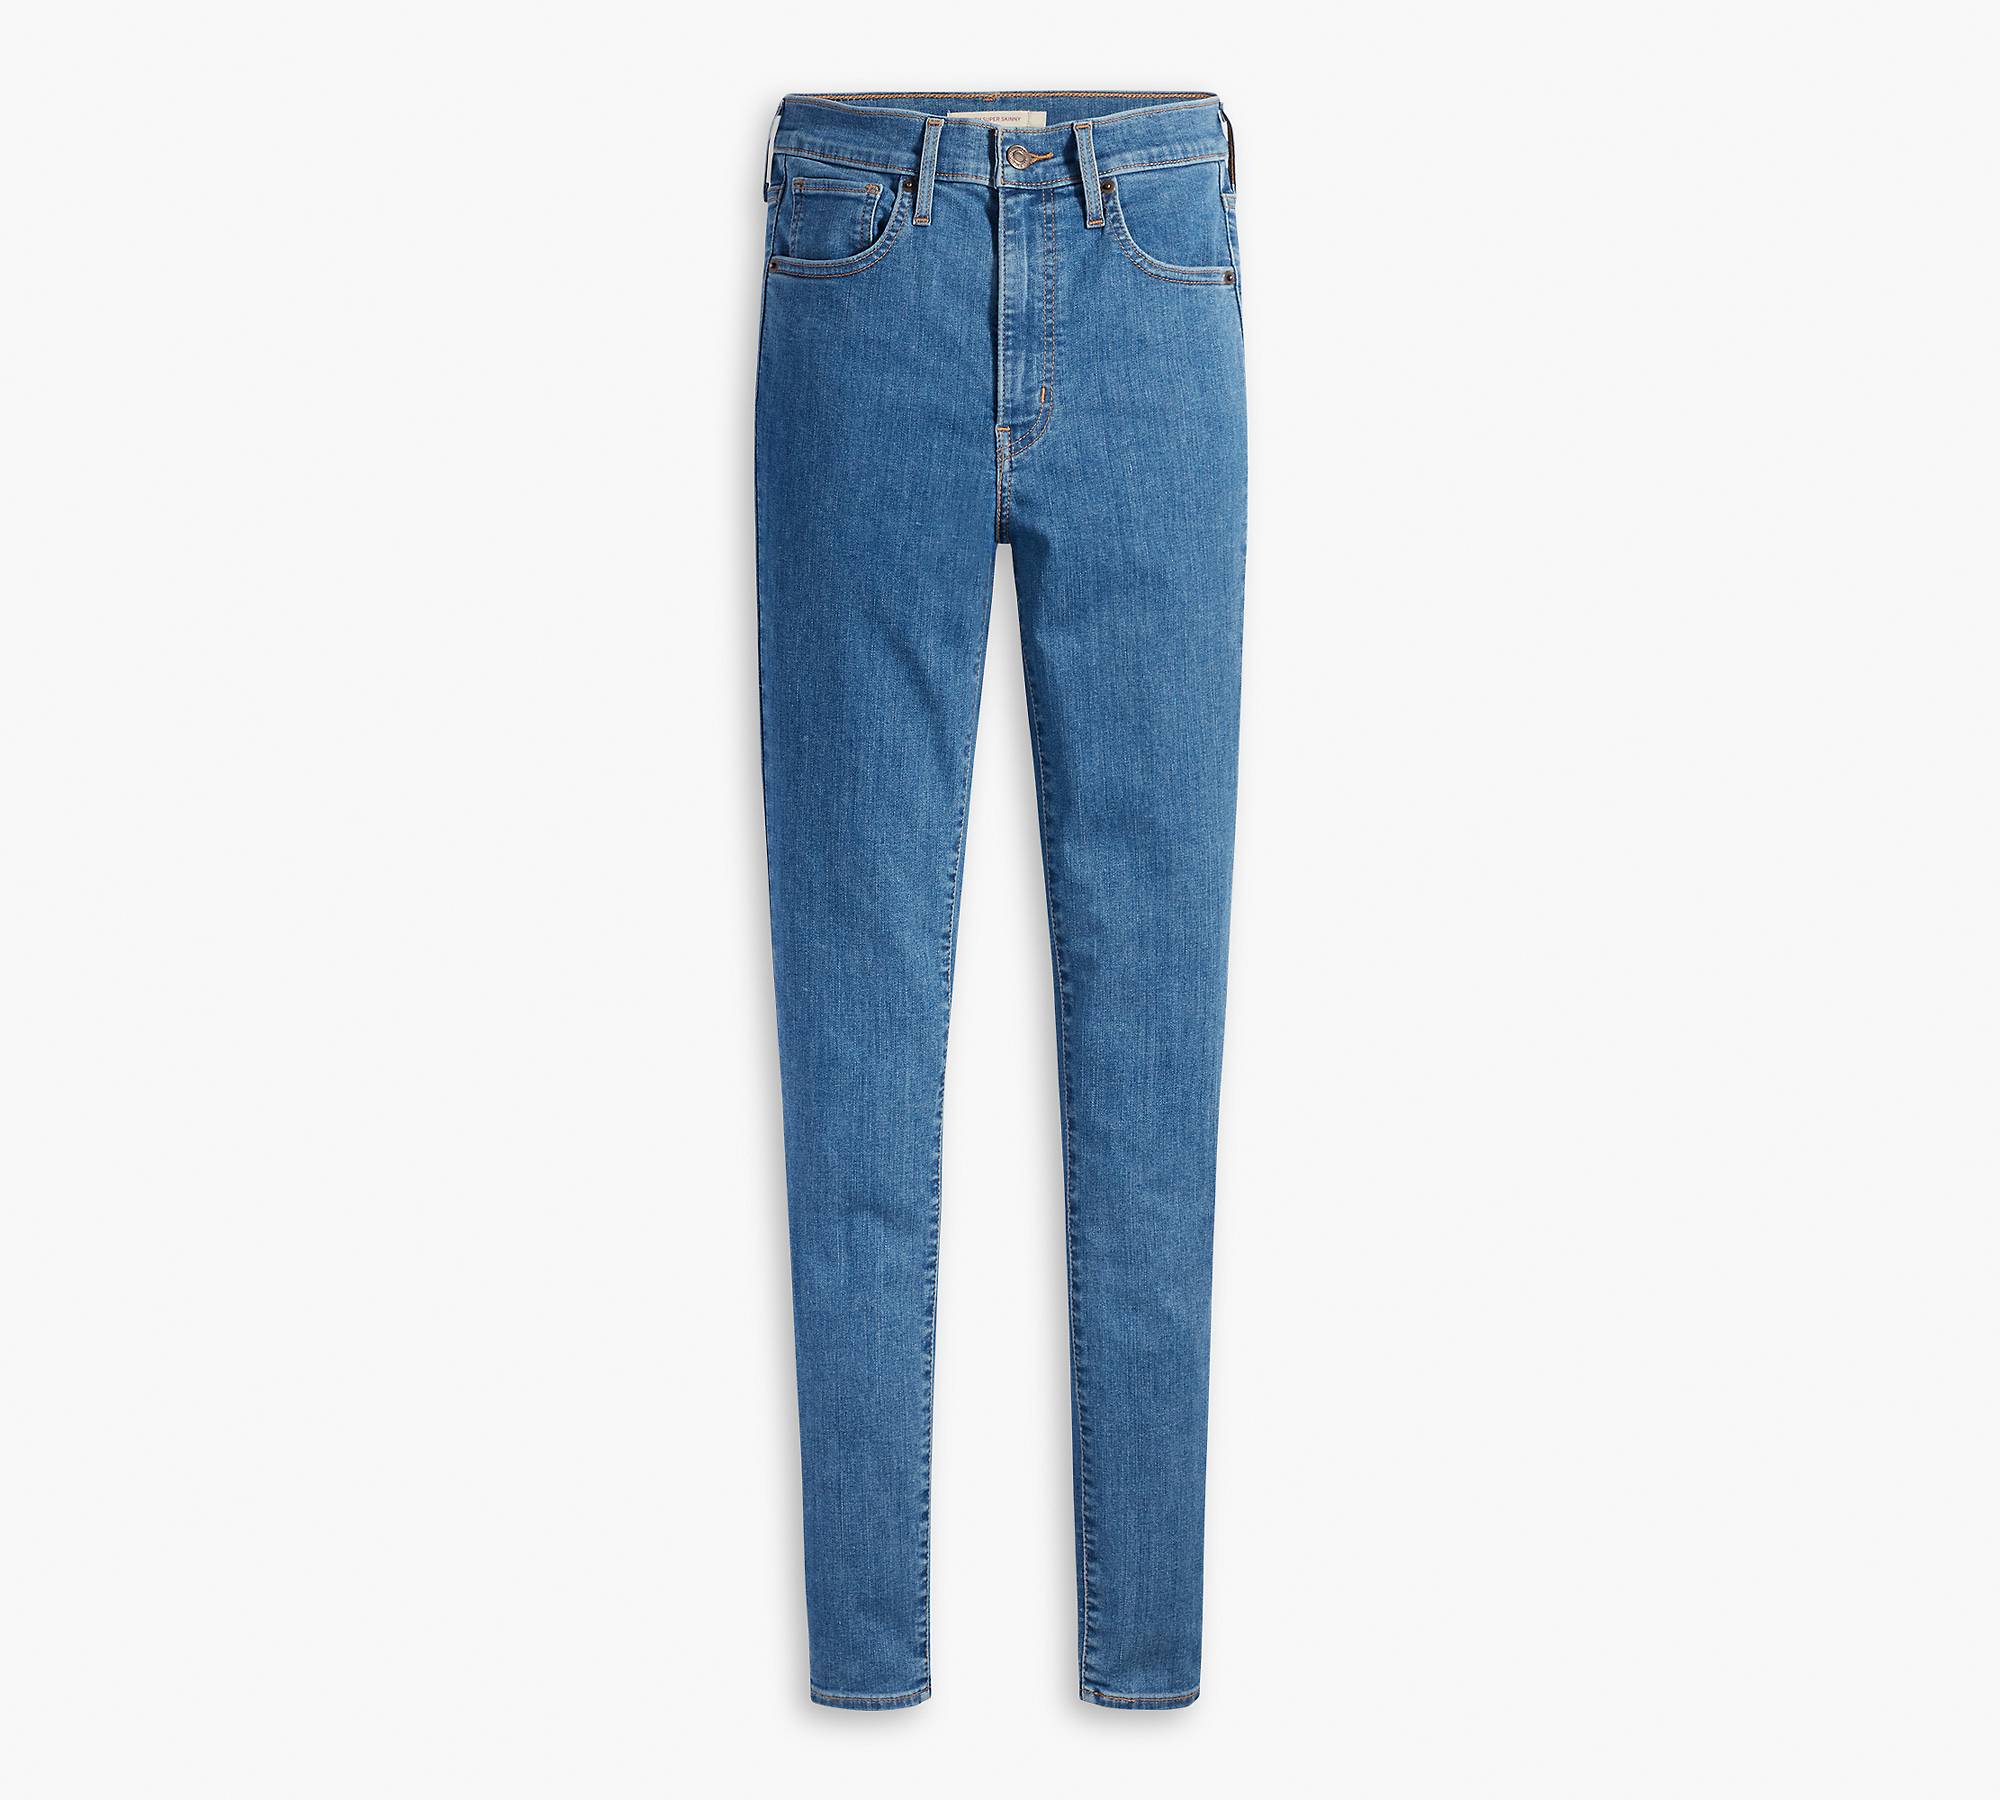 Women's Super Stretch Denim Skinny Pants, Sustainable Blue Jeans